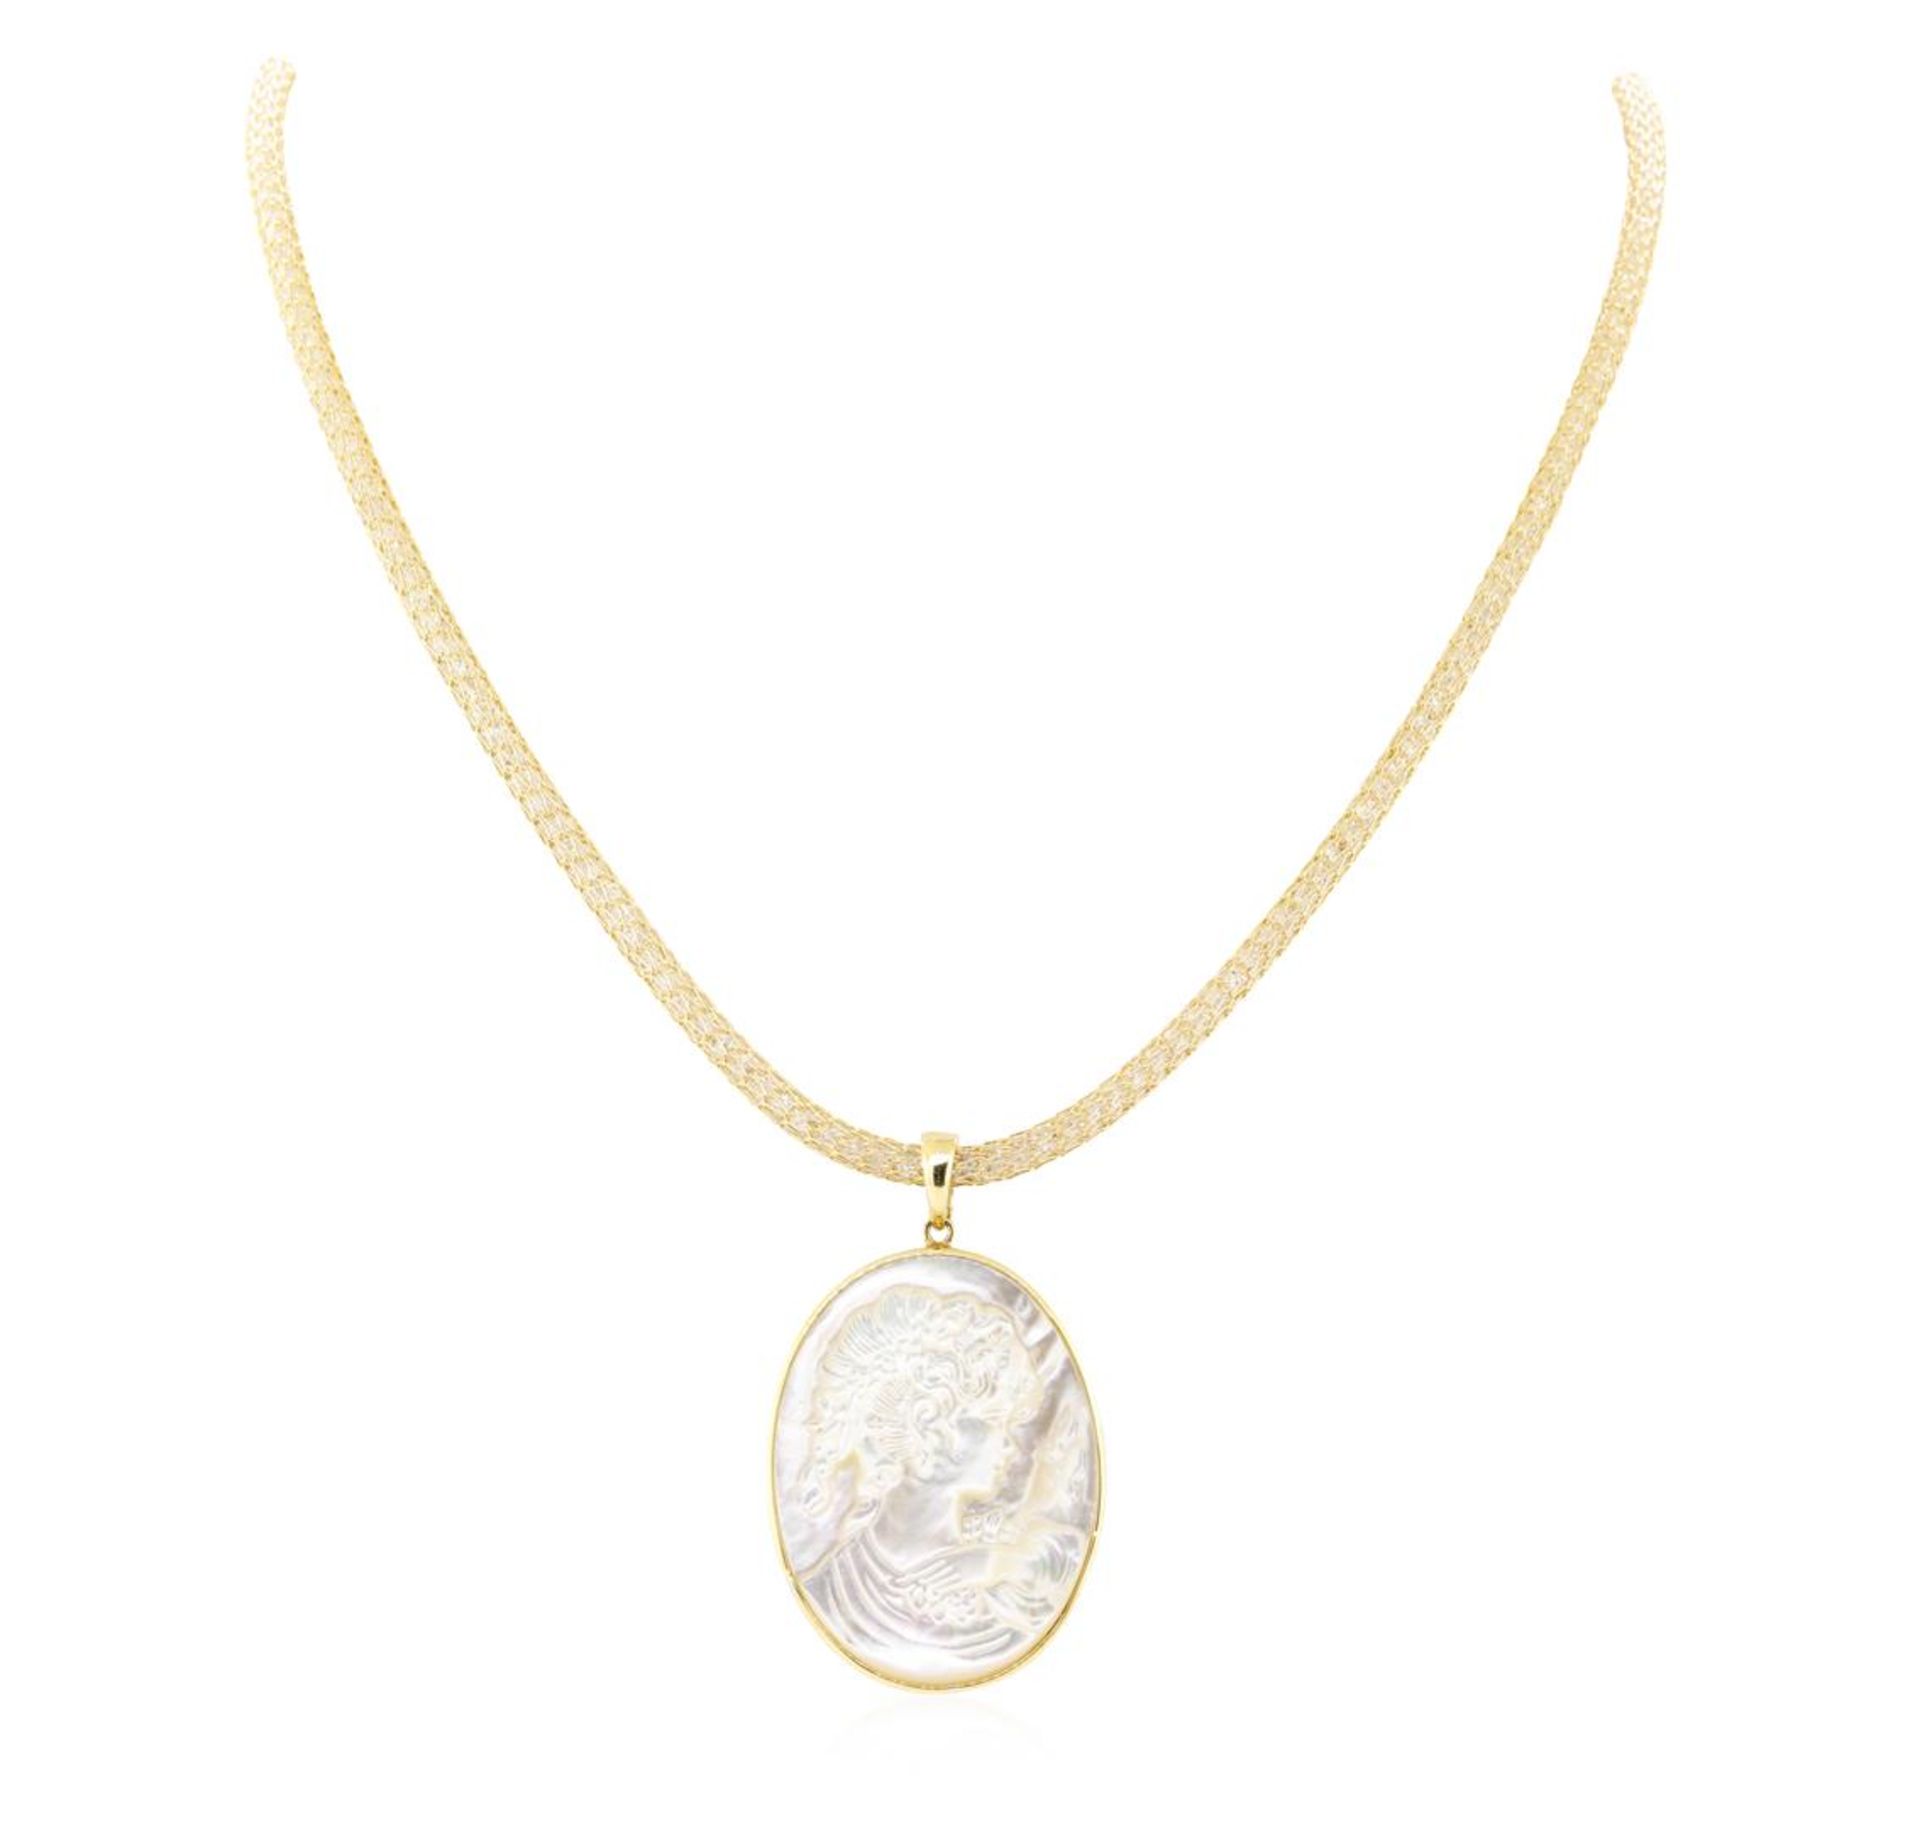 Mother of Pearl Cameo Pendant and Chain - 14KT Yellow Gold - Image 2 of 2